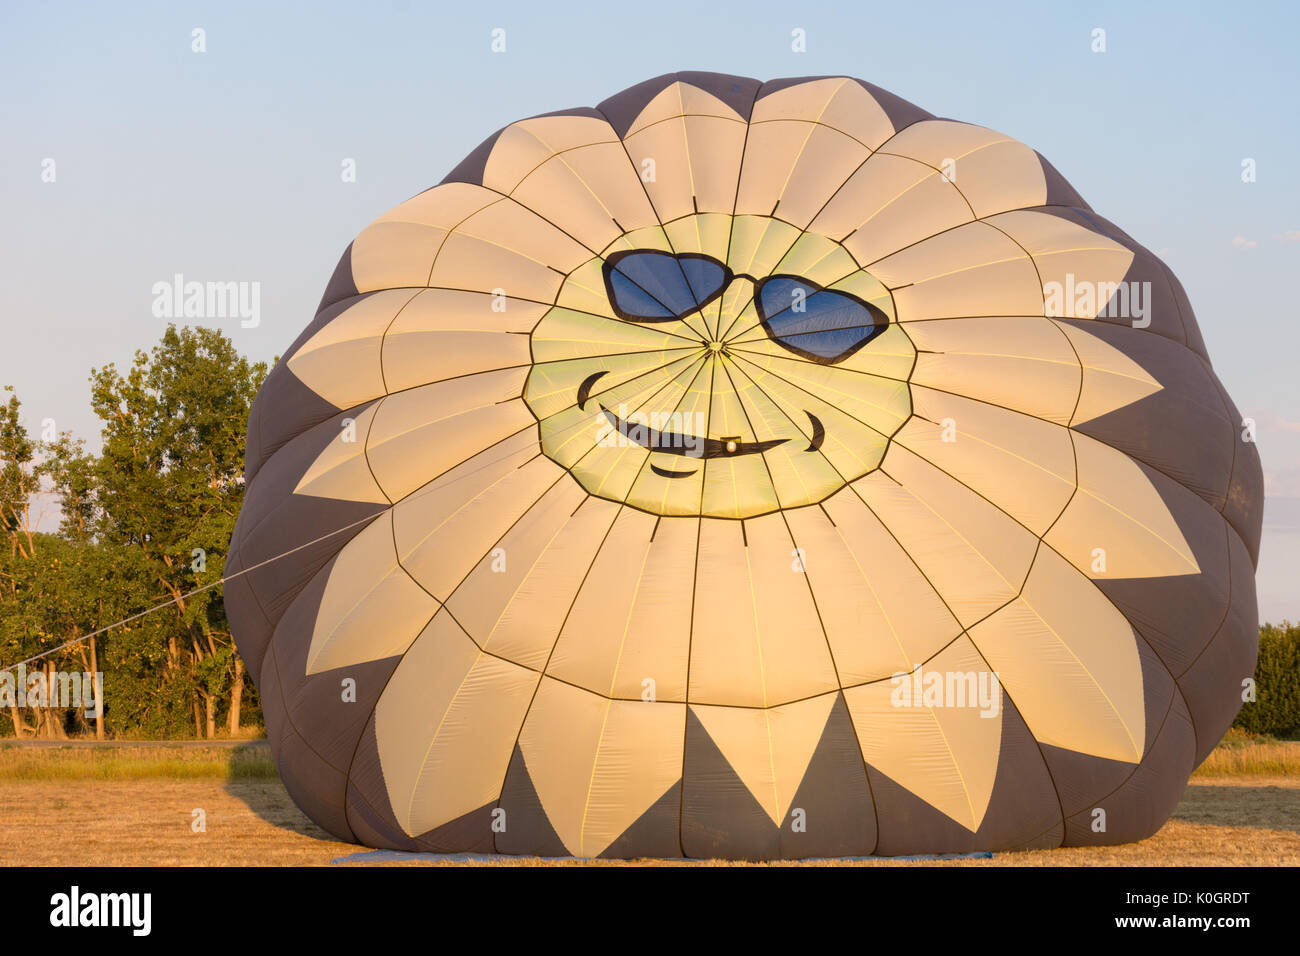 A hot air balloon with a happy sun face with blue sunglasses on the top, The balloon is being inflated at sunrise. Stock Photo